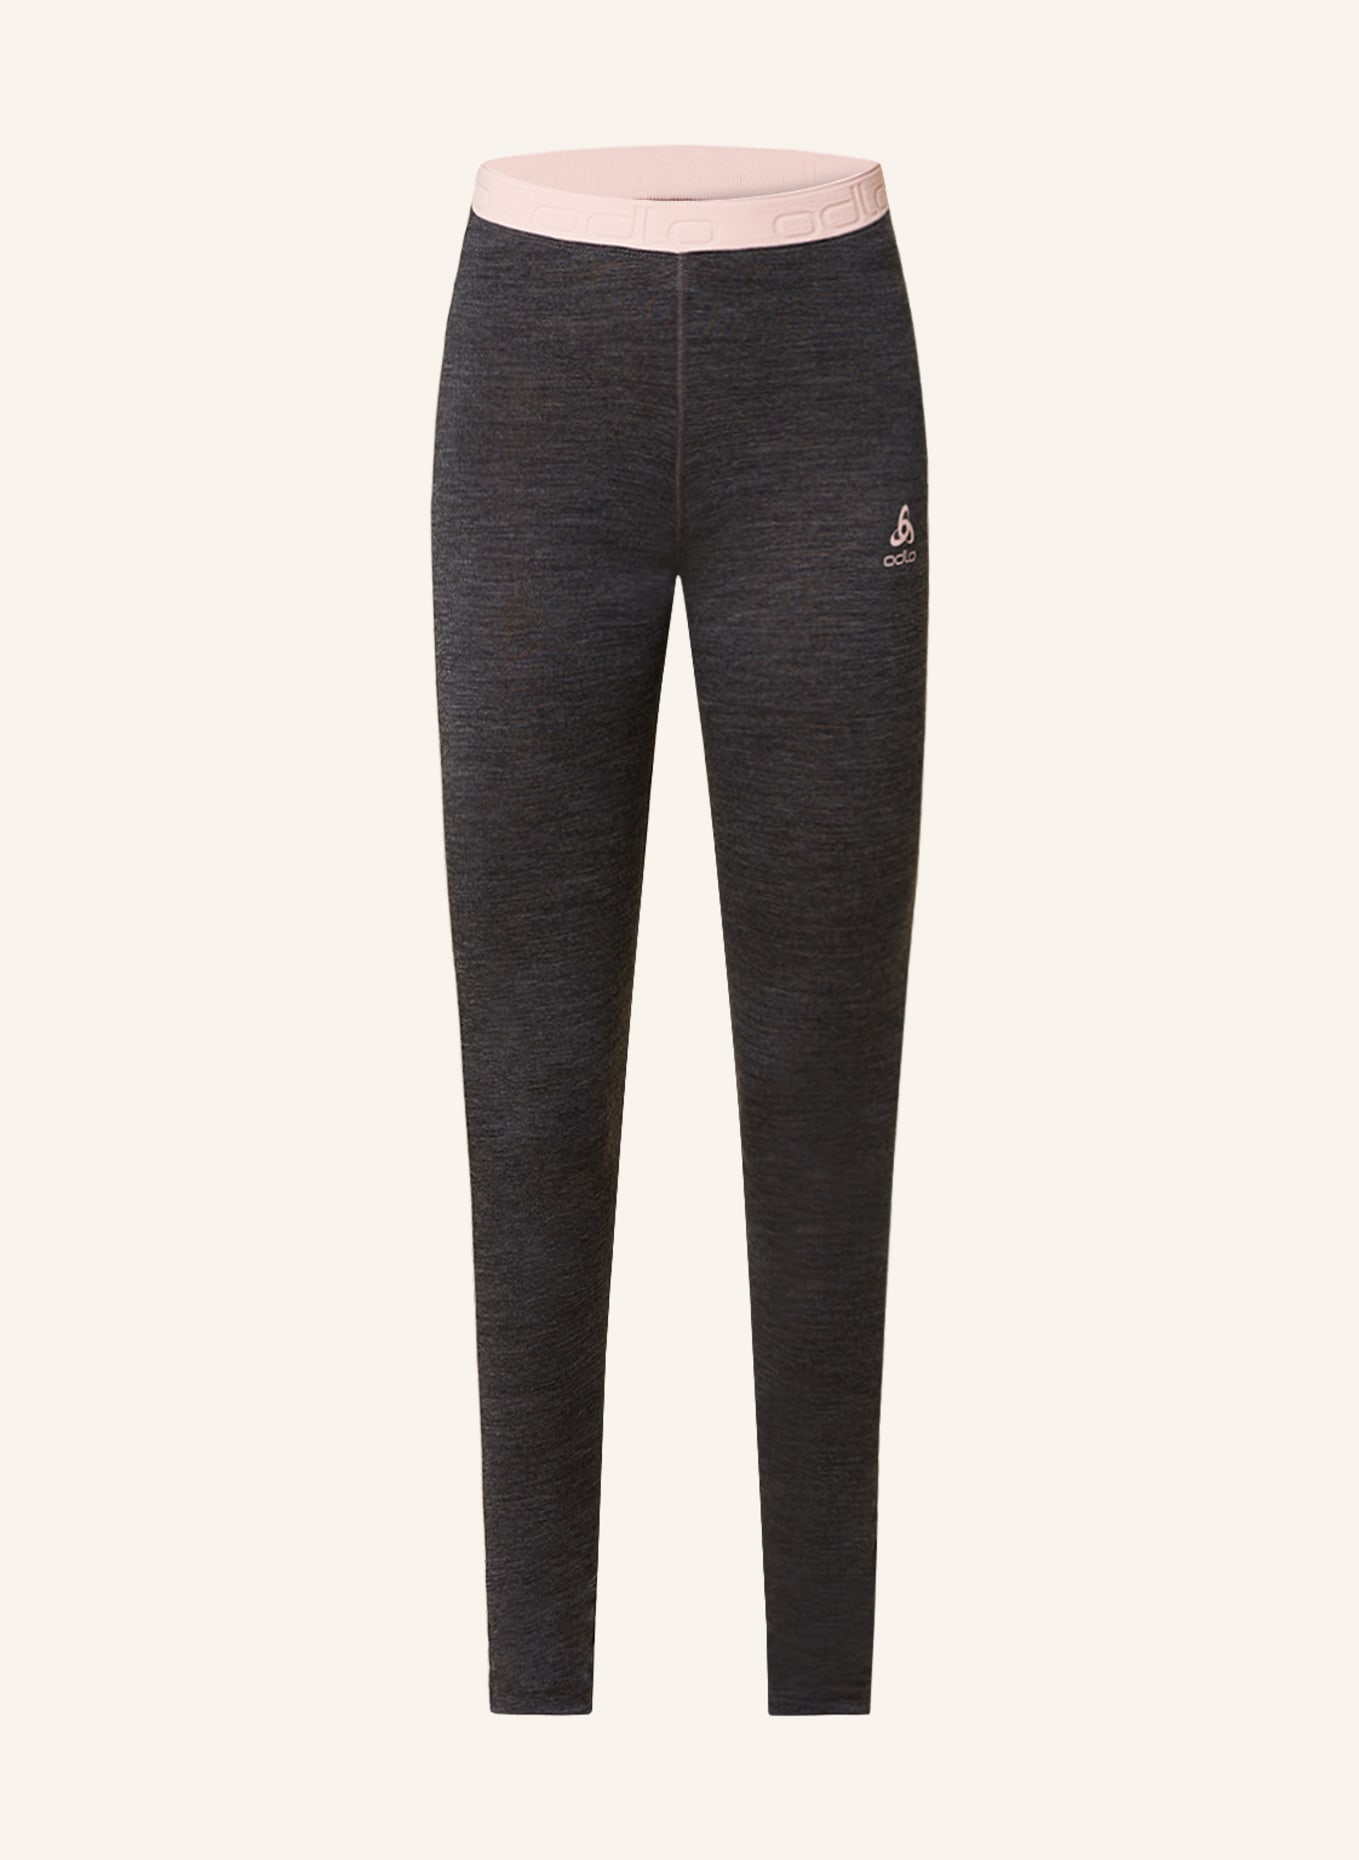 odlo Functional baselayer trousers PERFORMANCE WOOL 150 with merino wool, Color: DARK GRAY/ PINK (Image 1)